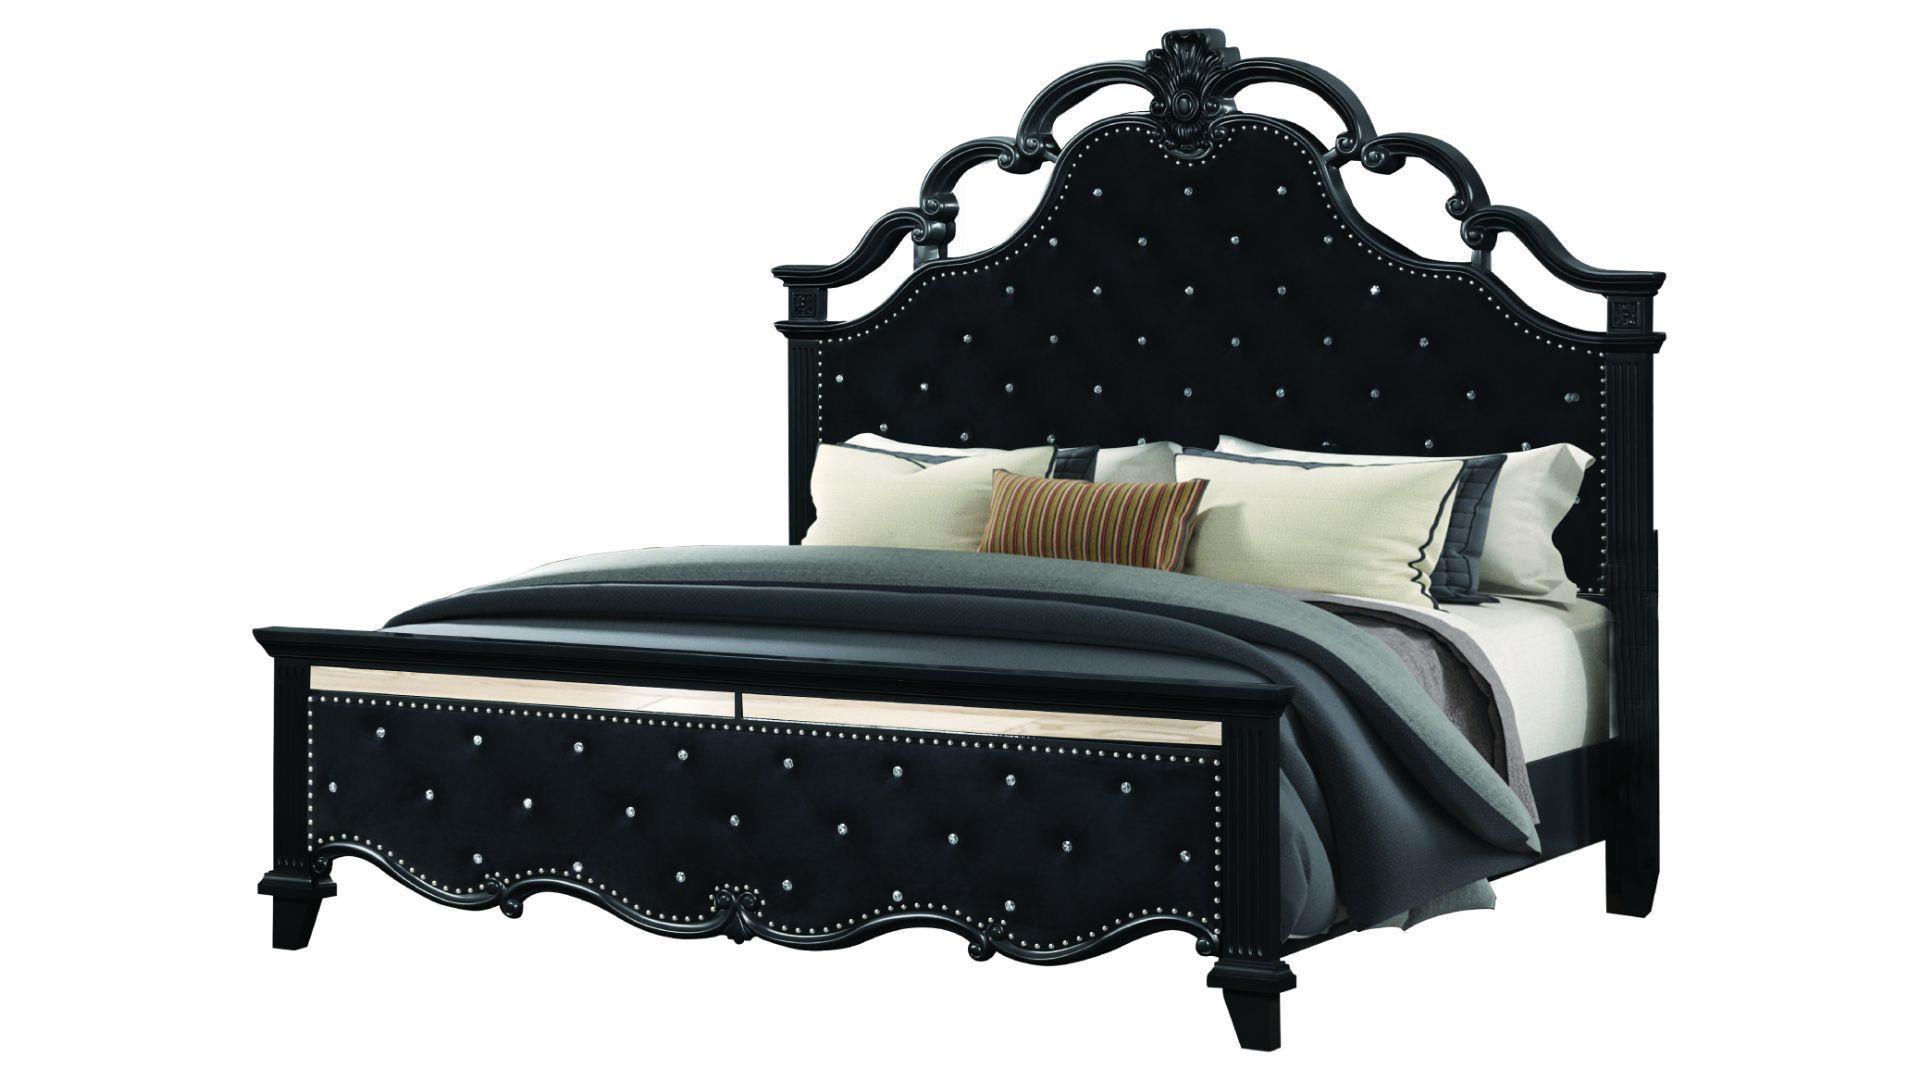 

    
Glam Black Tufted Queen Bedroom Set 4P MILAN Galaxy Home Contemporary Modern
